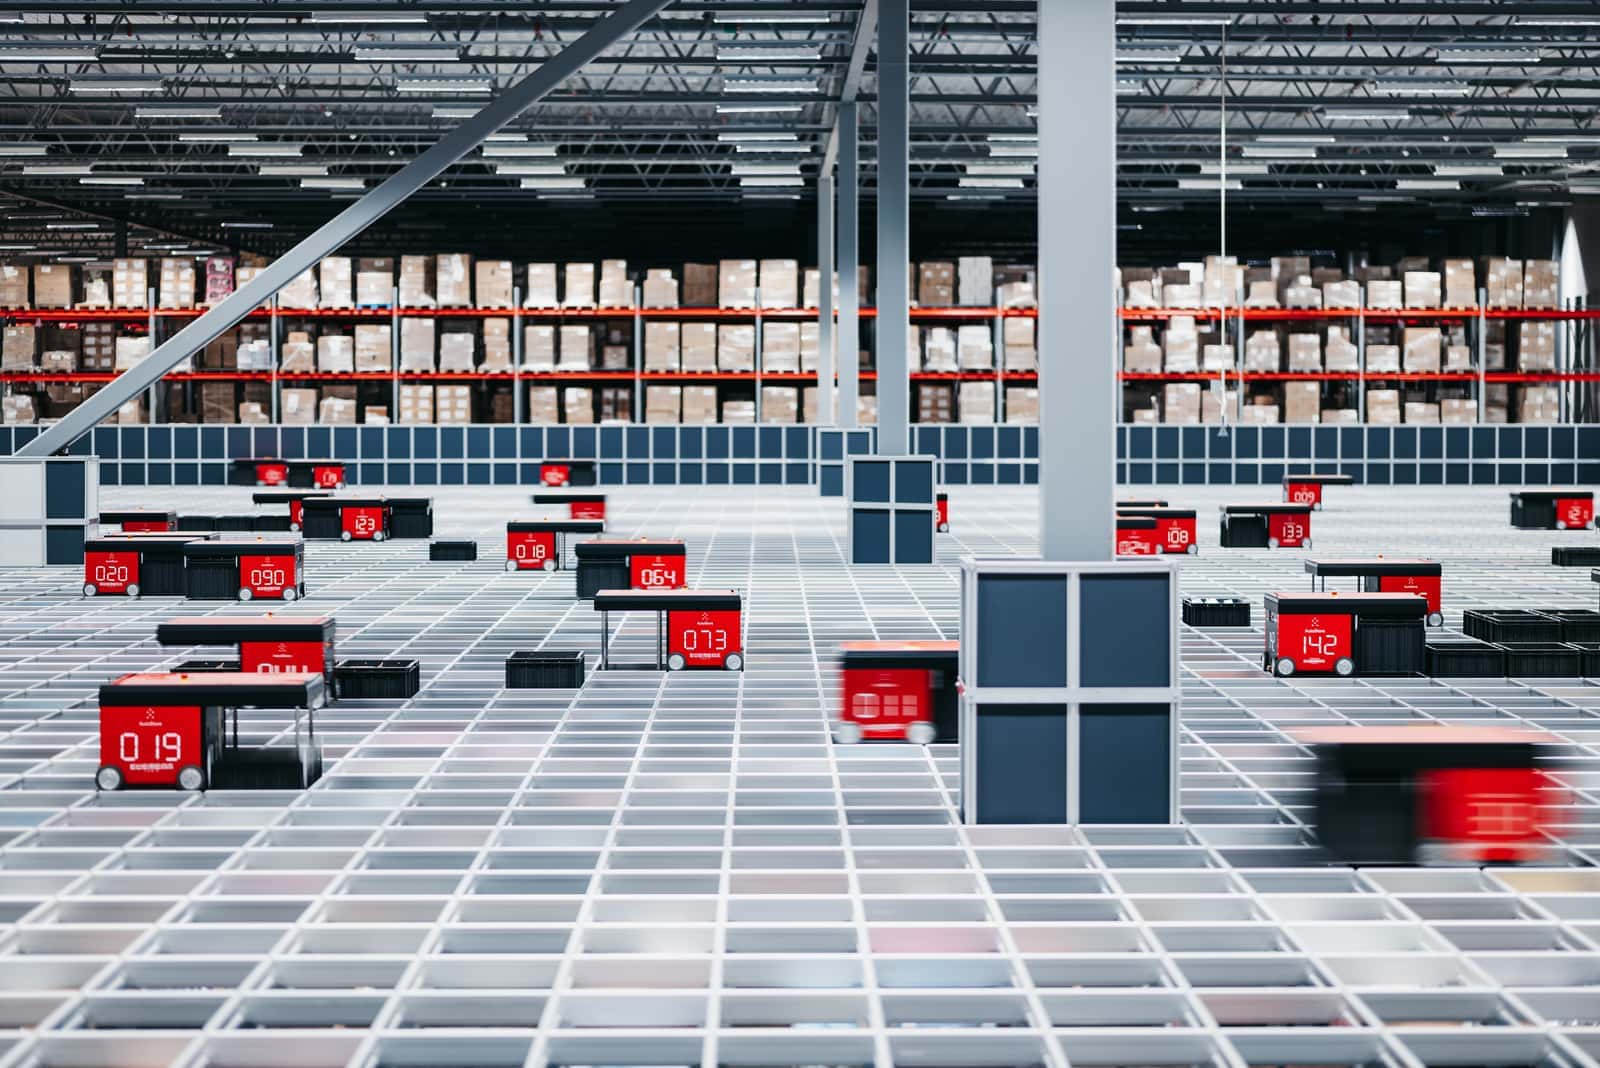 AutoStore robots in motion at a warehouse